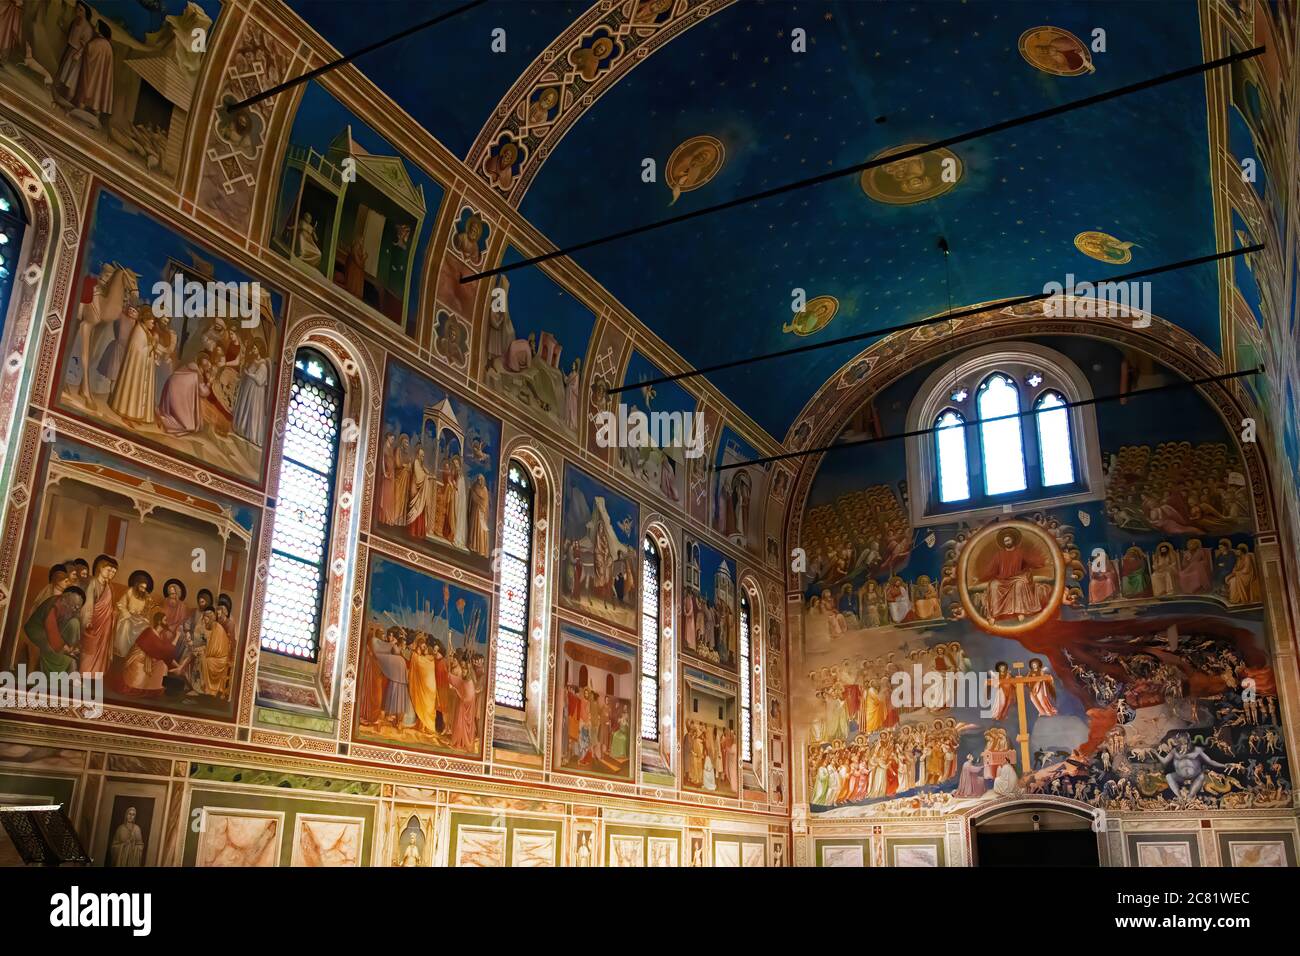 Magnificence of Scrovegni Chapel by Giotto in Padua, Italy Stock Photo